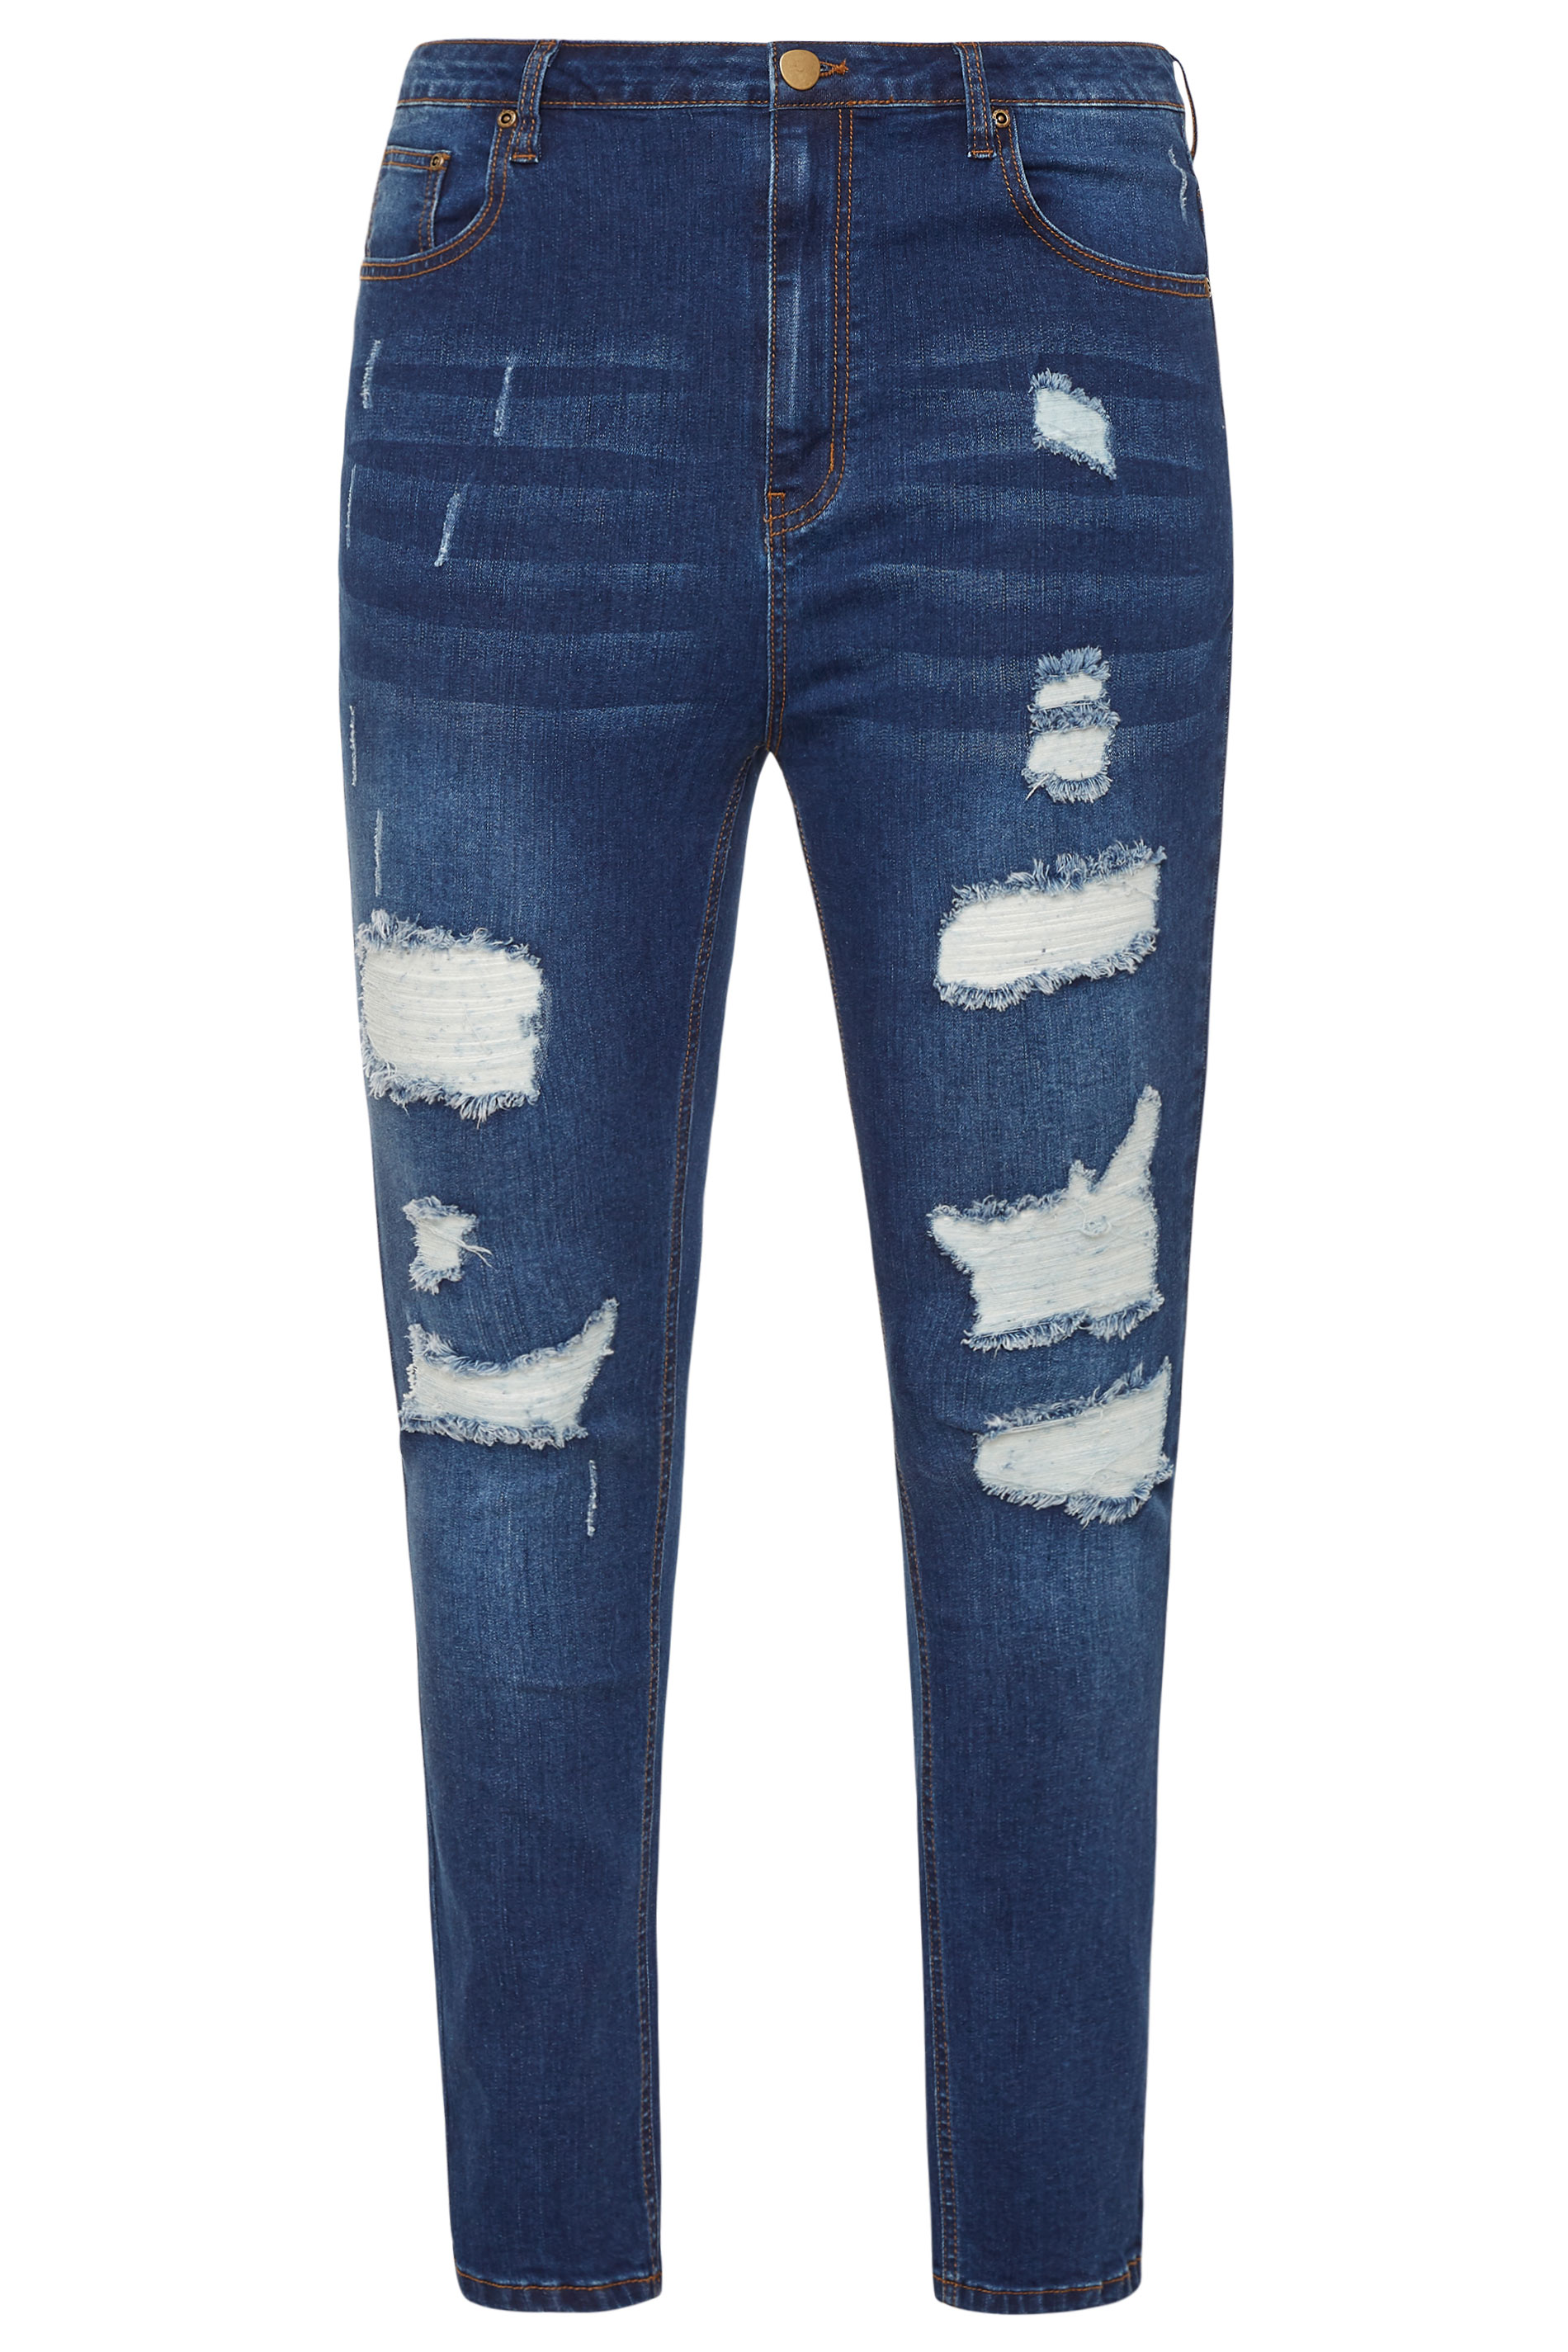 Dark Blue Extreme Distressed Ripped Skinny Stretch AVA Jeans | Yours ...